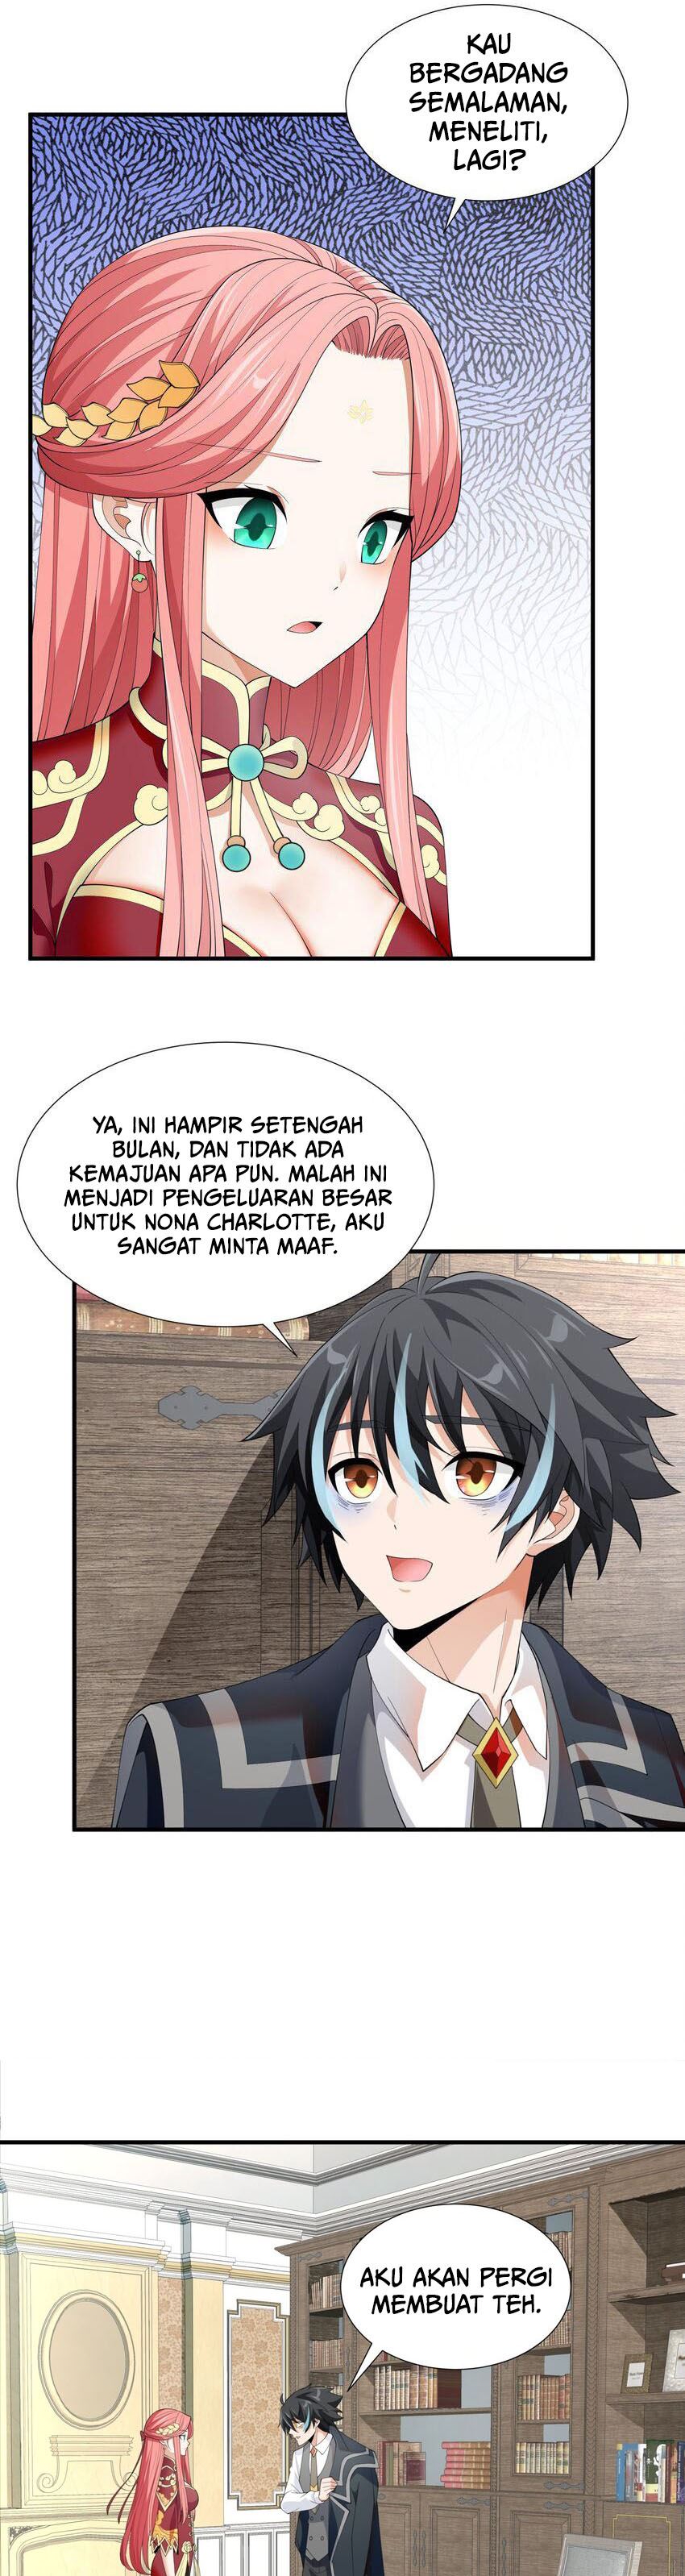 Dilarang COPAS - situs resmi www.mangacanblog.com - Komik little tyrant doesnt want to meet with a bad end 033 - chapter 33 34 Indonesia little tyrant doesnt want to meet with a bad end 033 - chapter 33 Terbaru 16|Baca Manga Komik Indonesia|Mangacan